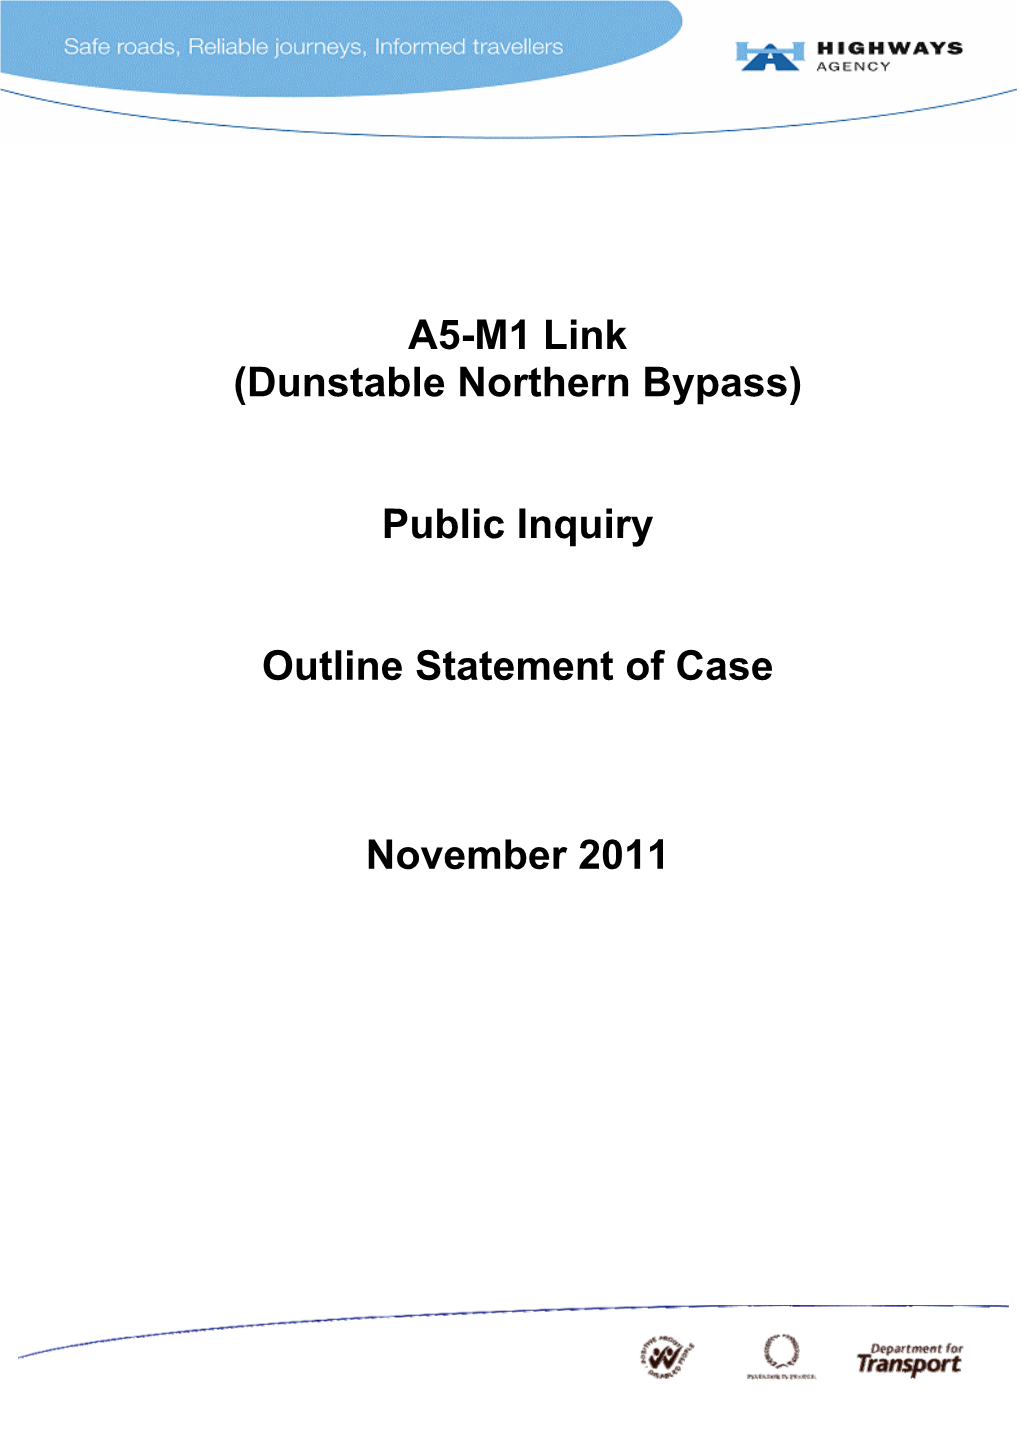 A5-M1 Link (Dunstable Northern Bypass) Outline Statement of Case